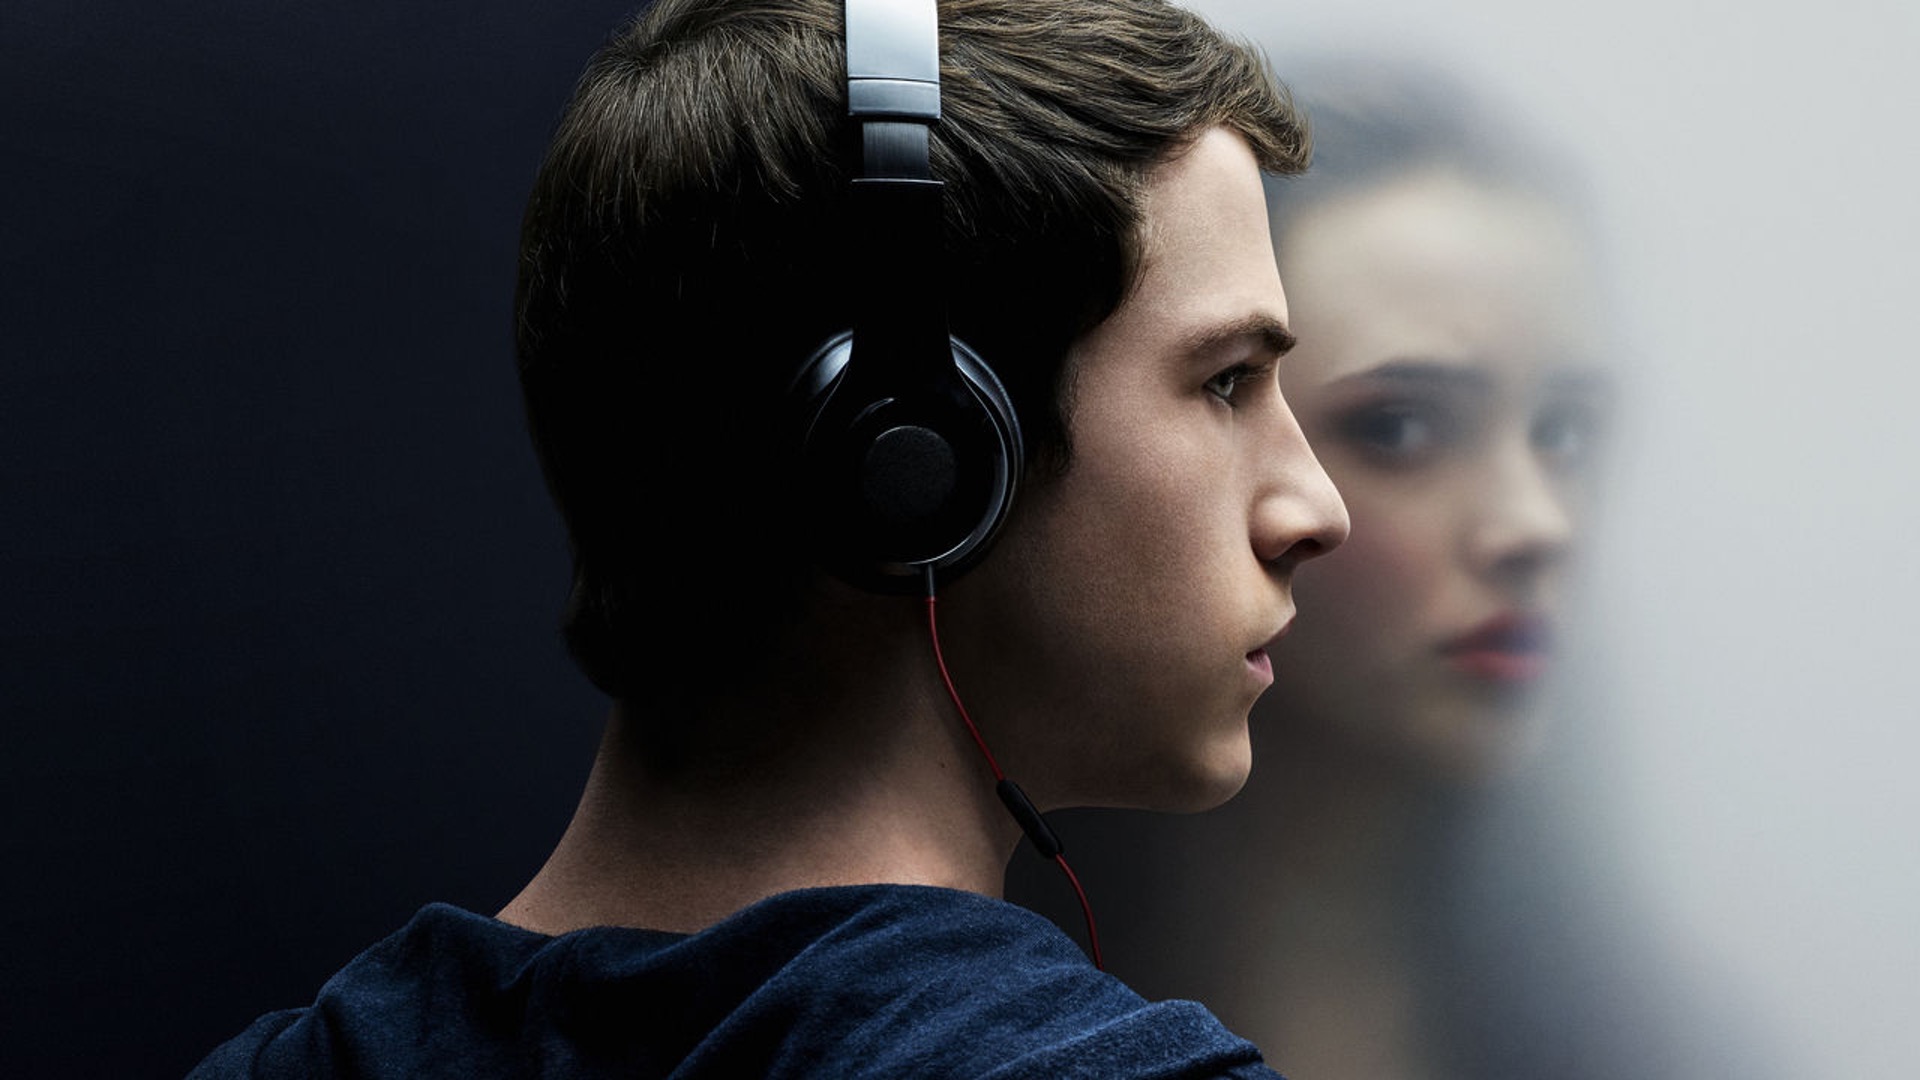 Wallpaper 13 Reasons Why, TV show, actor, face, head phone, Dylan Minnette